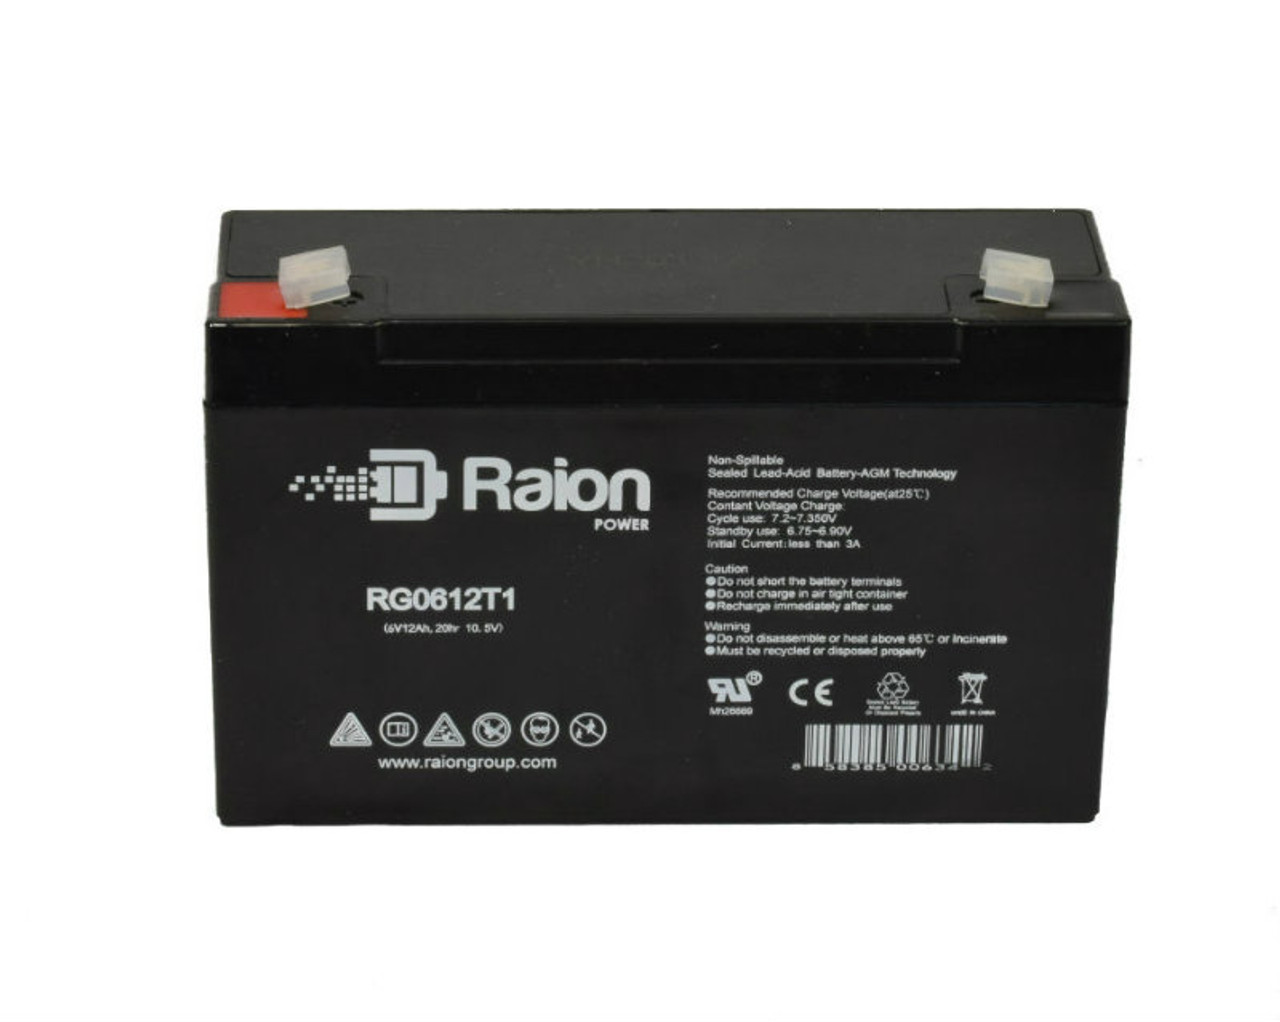 Raion Power RG06120T1 Replacement Battery Cartridge for APC CURK3